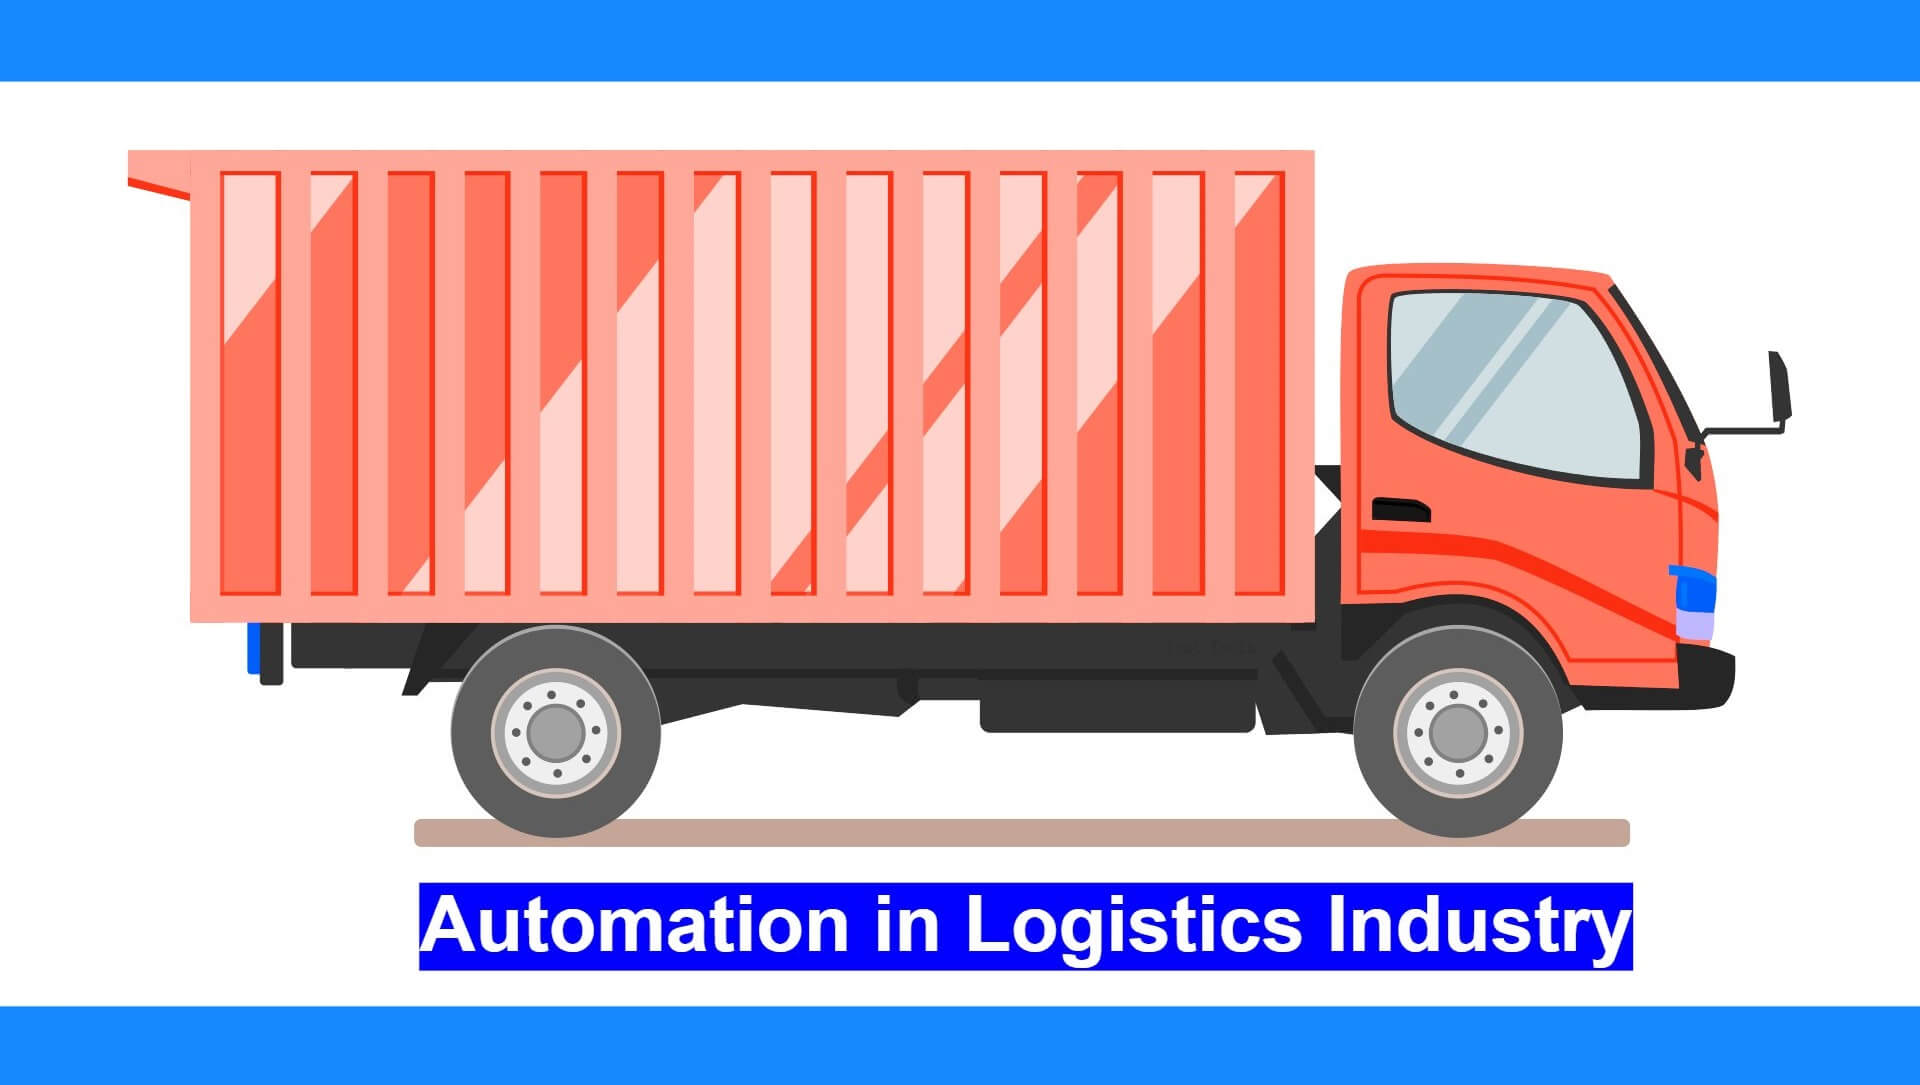 Automation in Logistics Industry